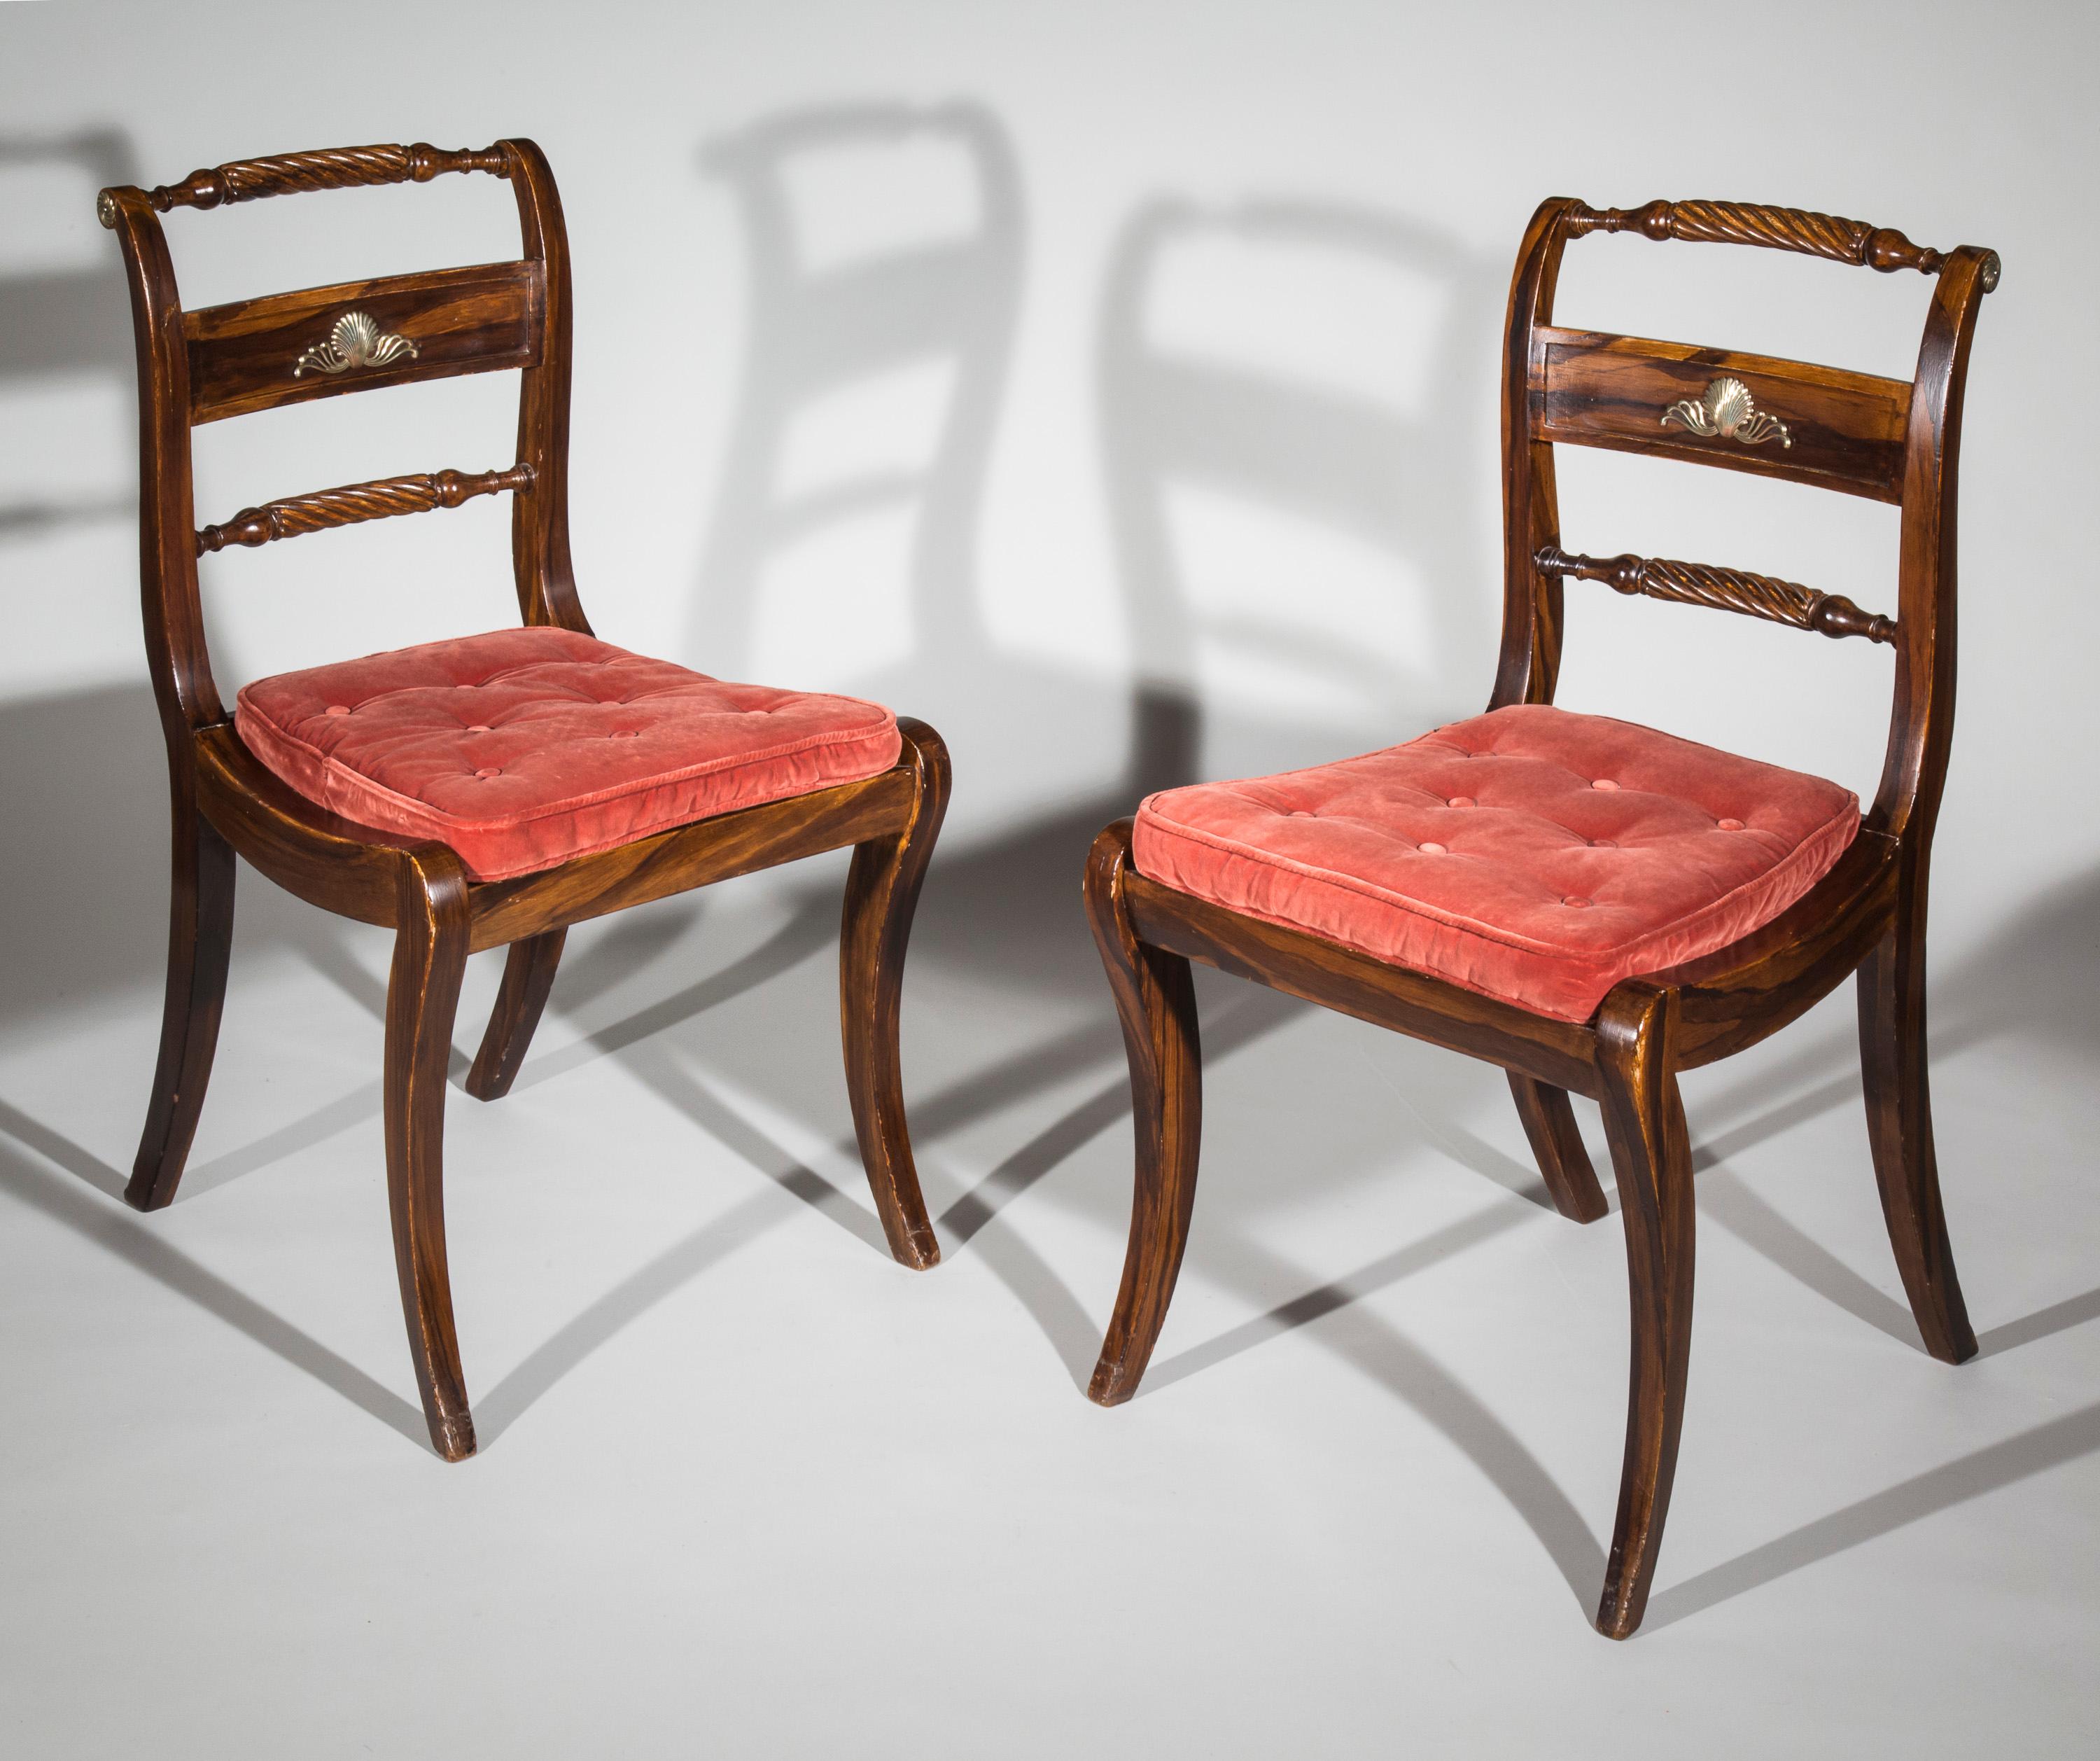 An elegant set of four English early 19th century Regency period Klismos chairs, brass-mounted and faux-bois painted to simulate calamander, with squab cushions,

circa 1820.

The scrolled backs with two rope-twist and curved rail and a tablet